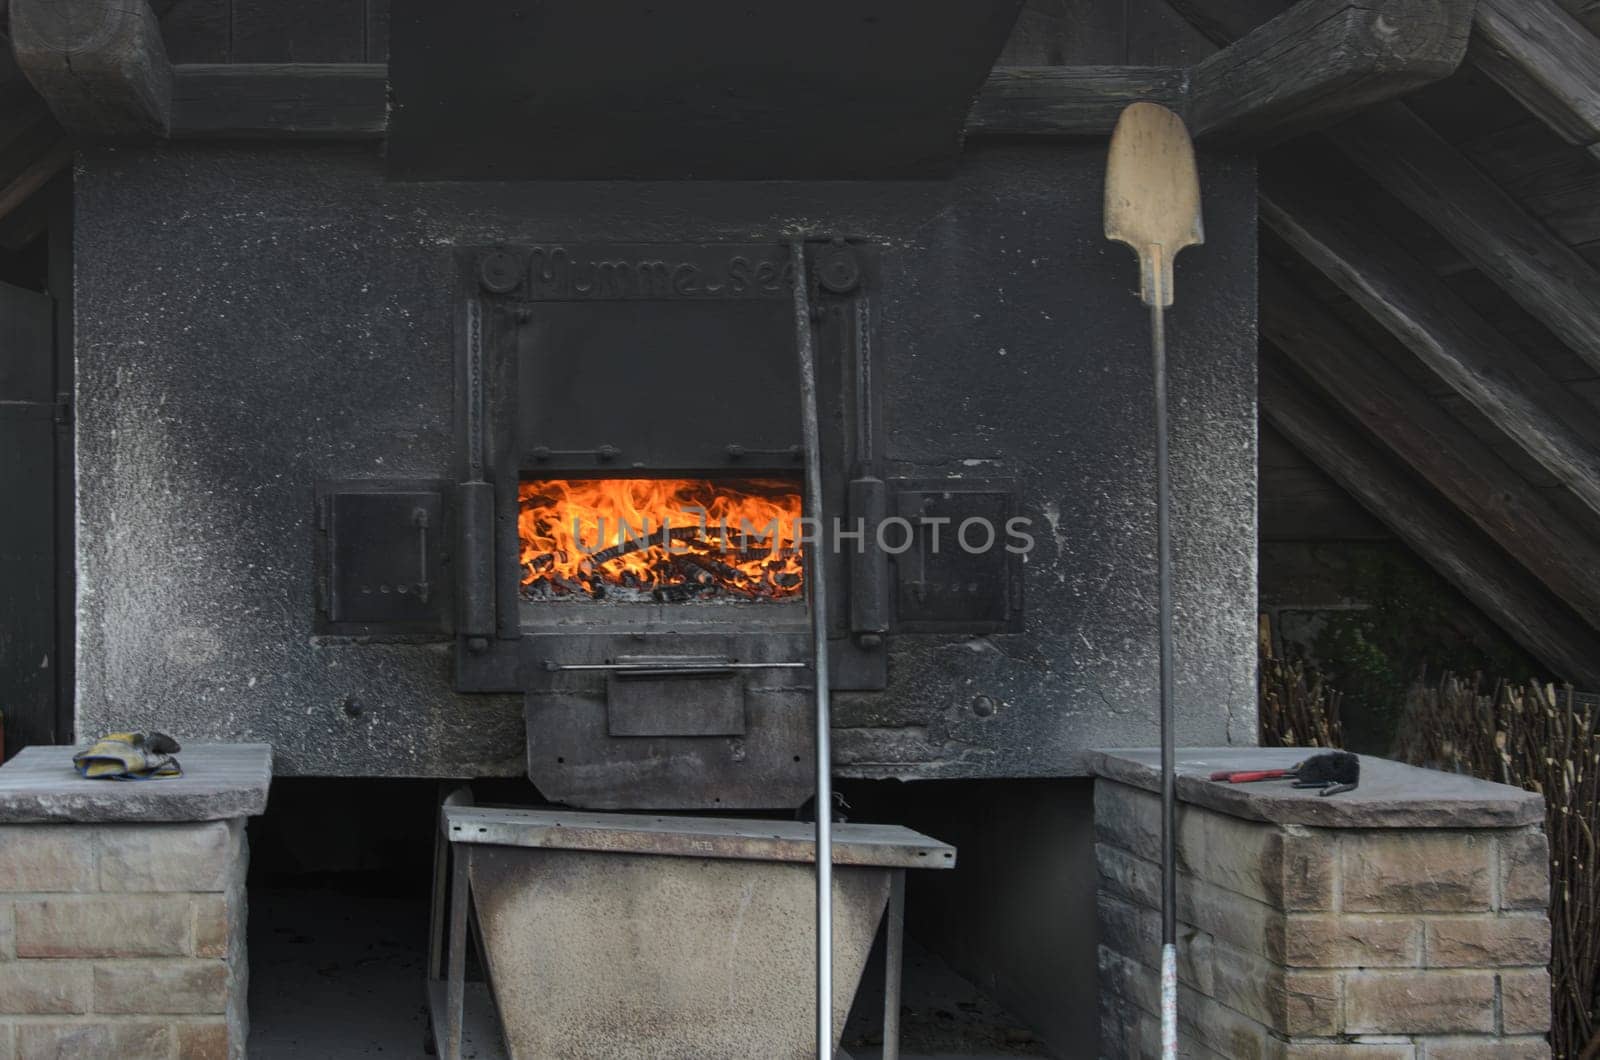 Rustic wood oven glowing with flames. Red fire in black oven.